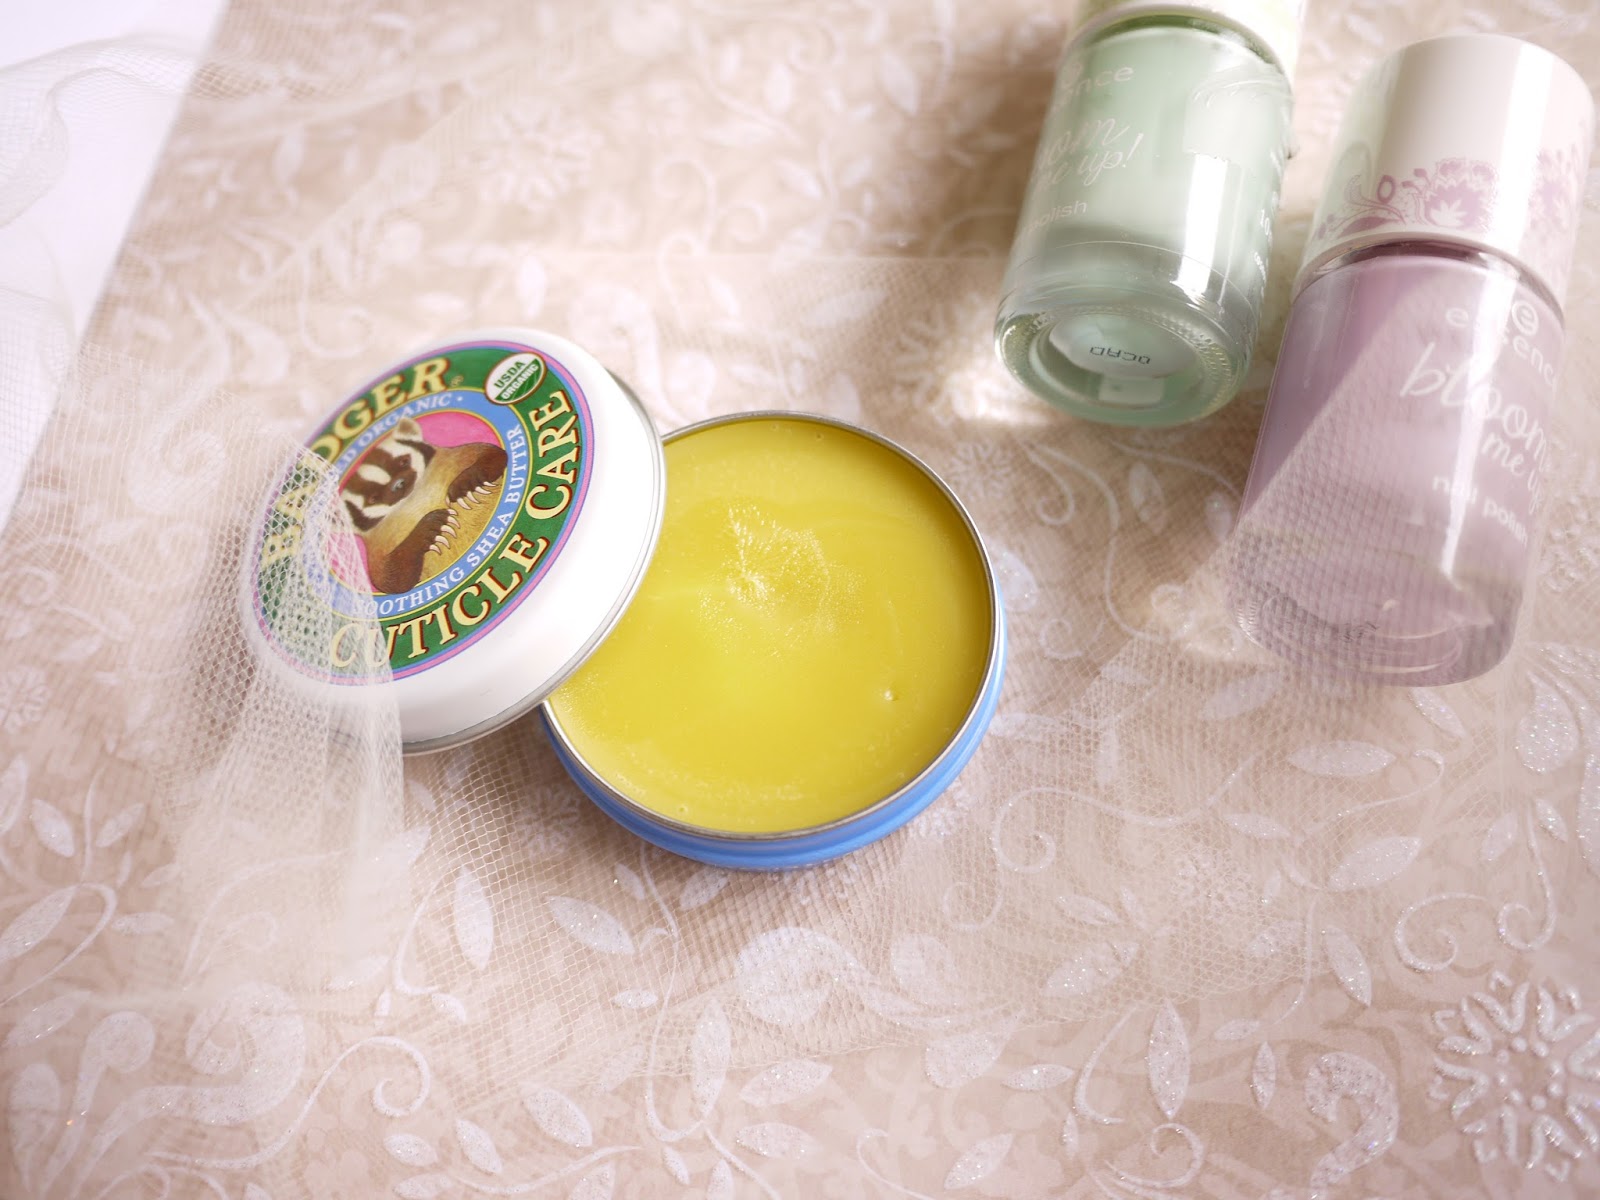 badger cuticle care review